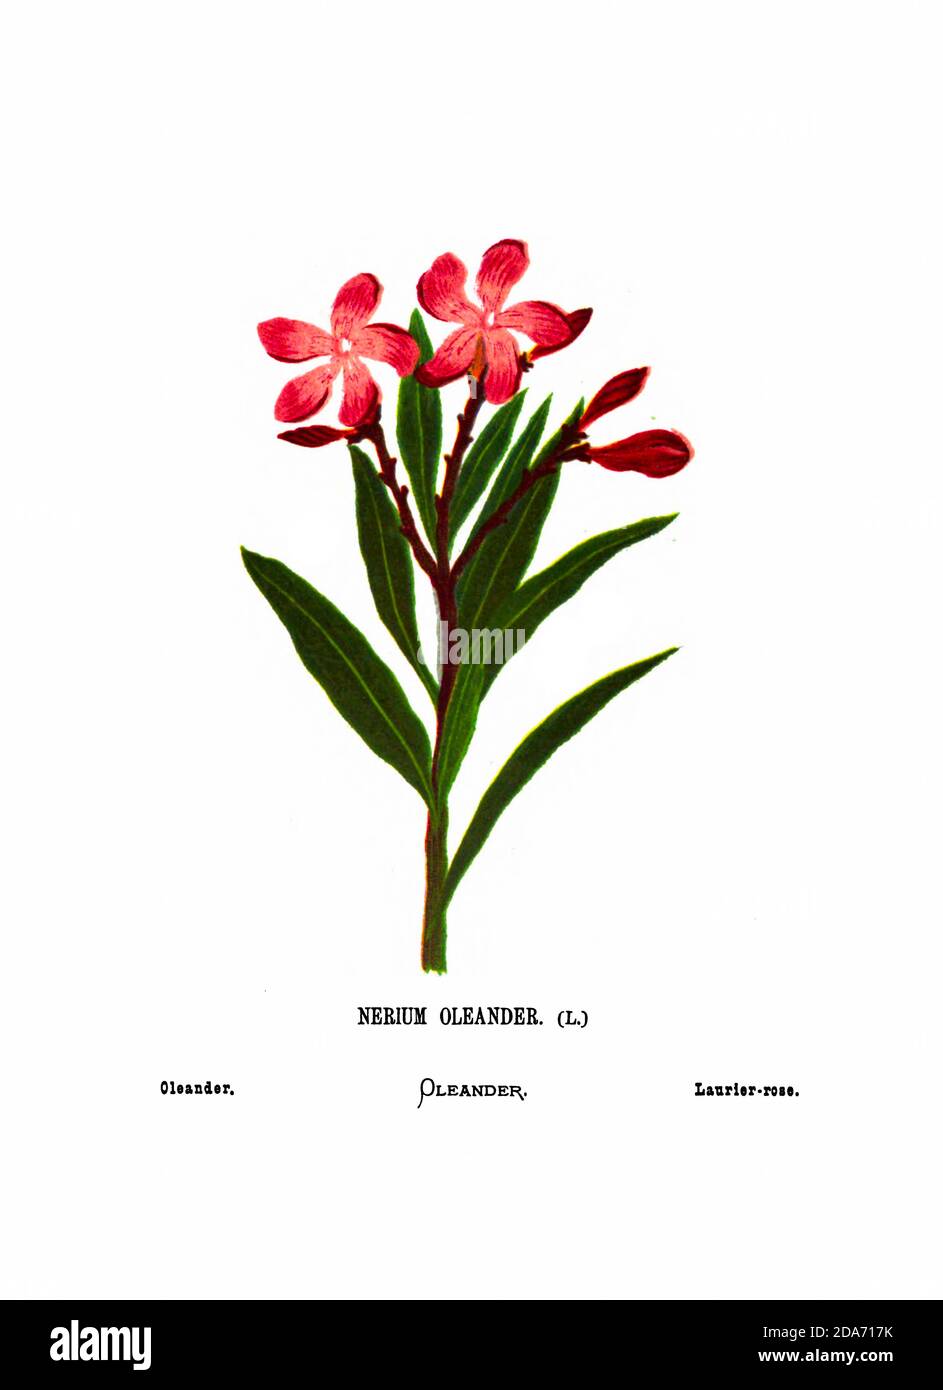 Nerium oleander most commonly known as nerium or oleander From the book Wild flowers of the Holy Land: Fifty-Four Plates Printed In Colours, Drawn And Painted After Nature. by Mrs. Hannah Zeller, (Gobat); Tristram, H. B. (Henry Baker), and Edward Atkinson, Published in London by James Nisbet & Co 1876 on white background Stock Photo